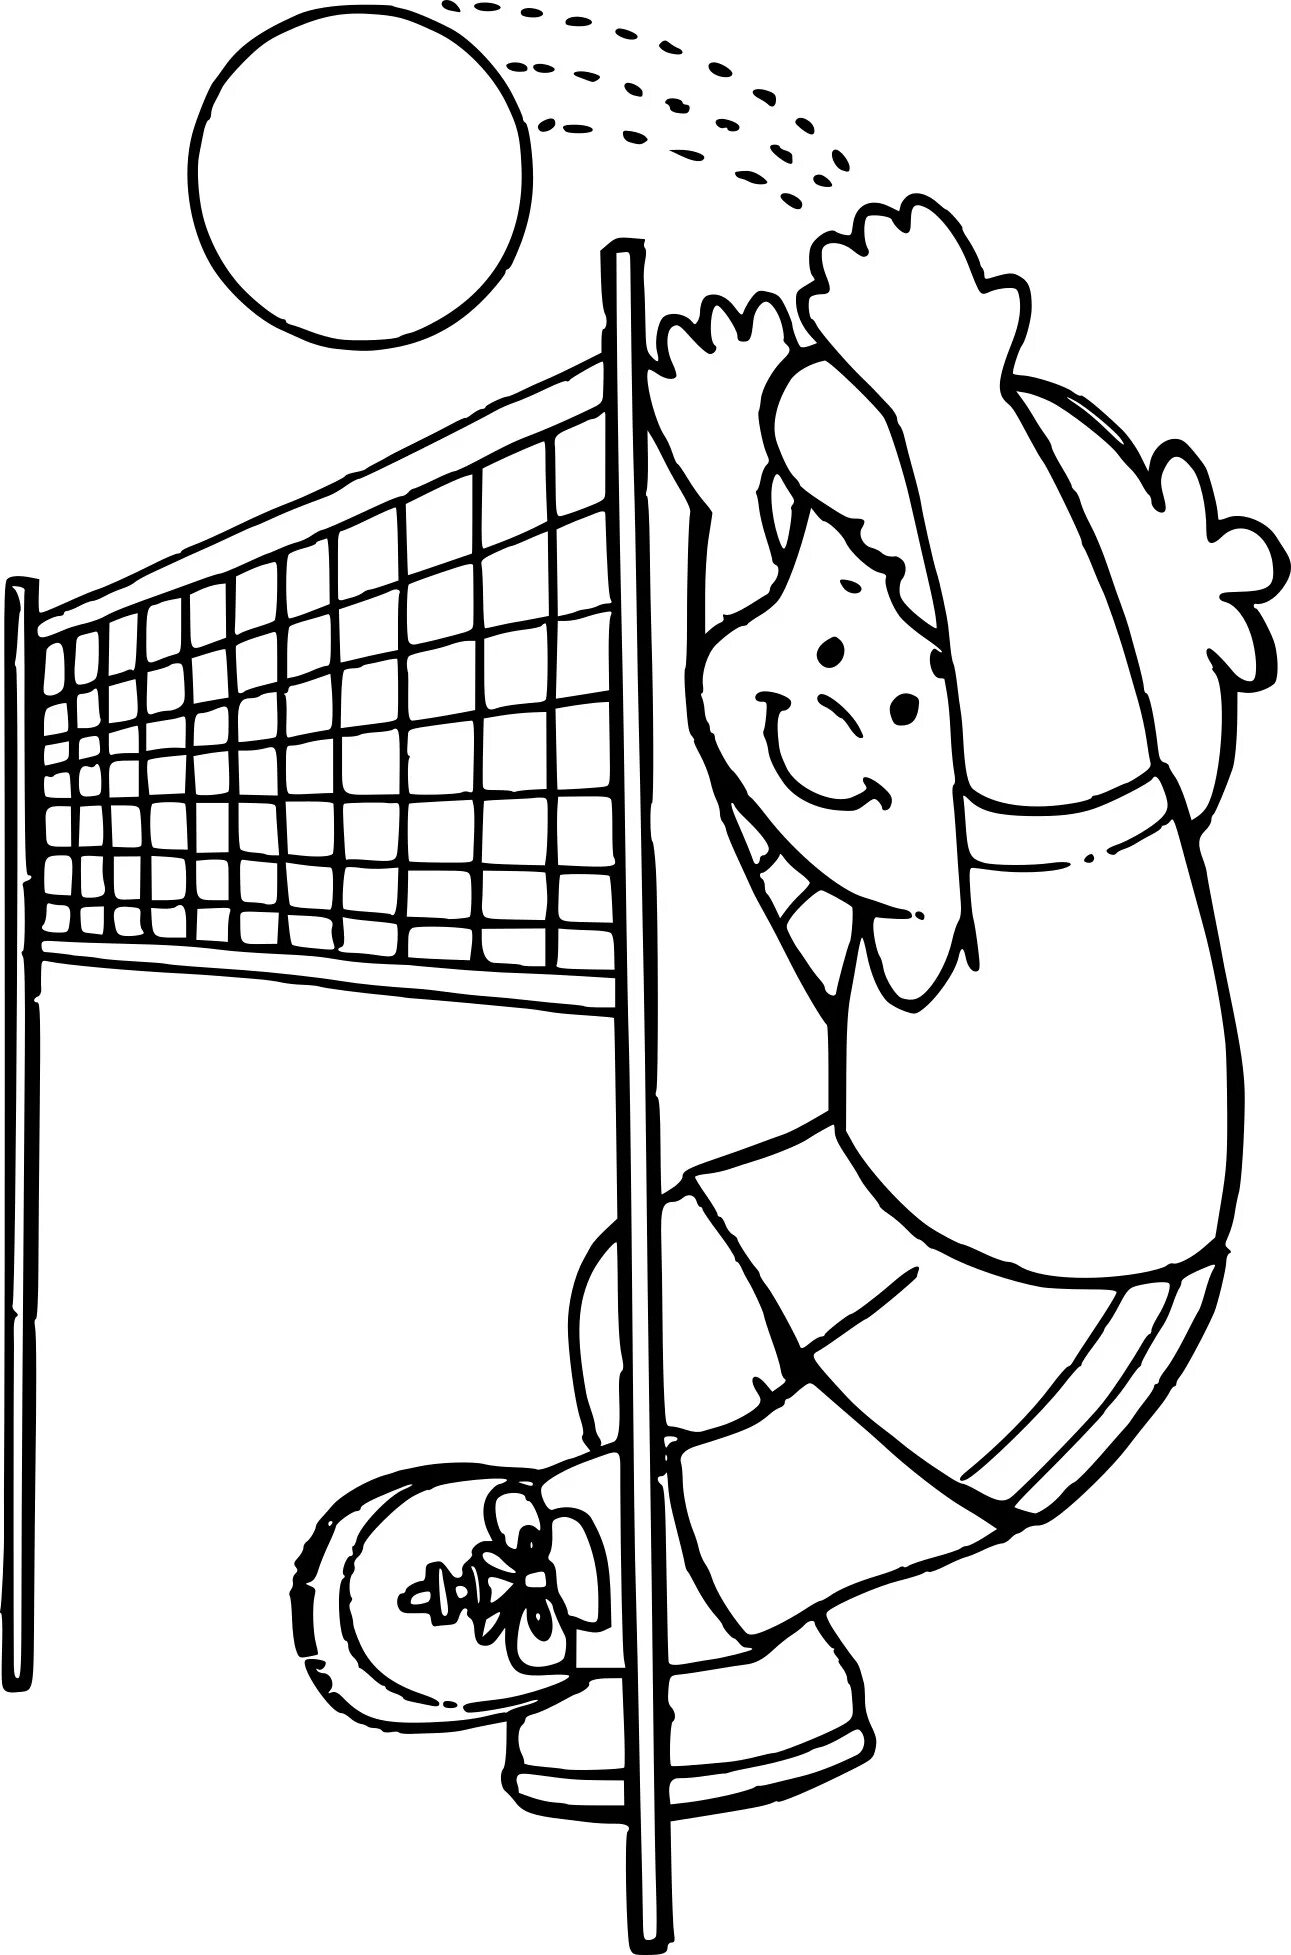 Fun sports coloring pages for preschoolers